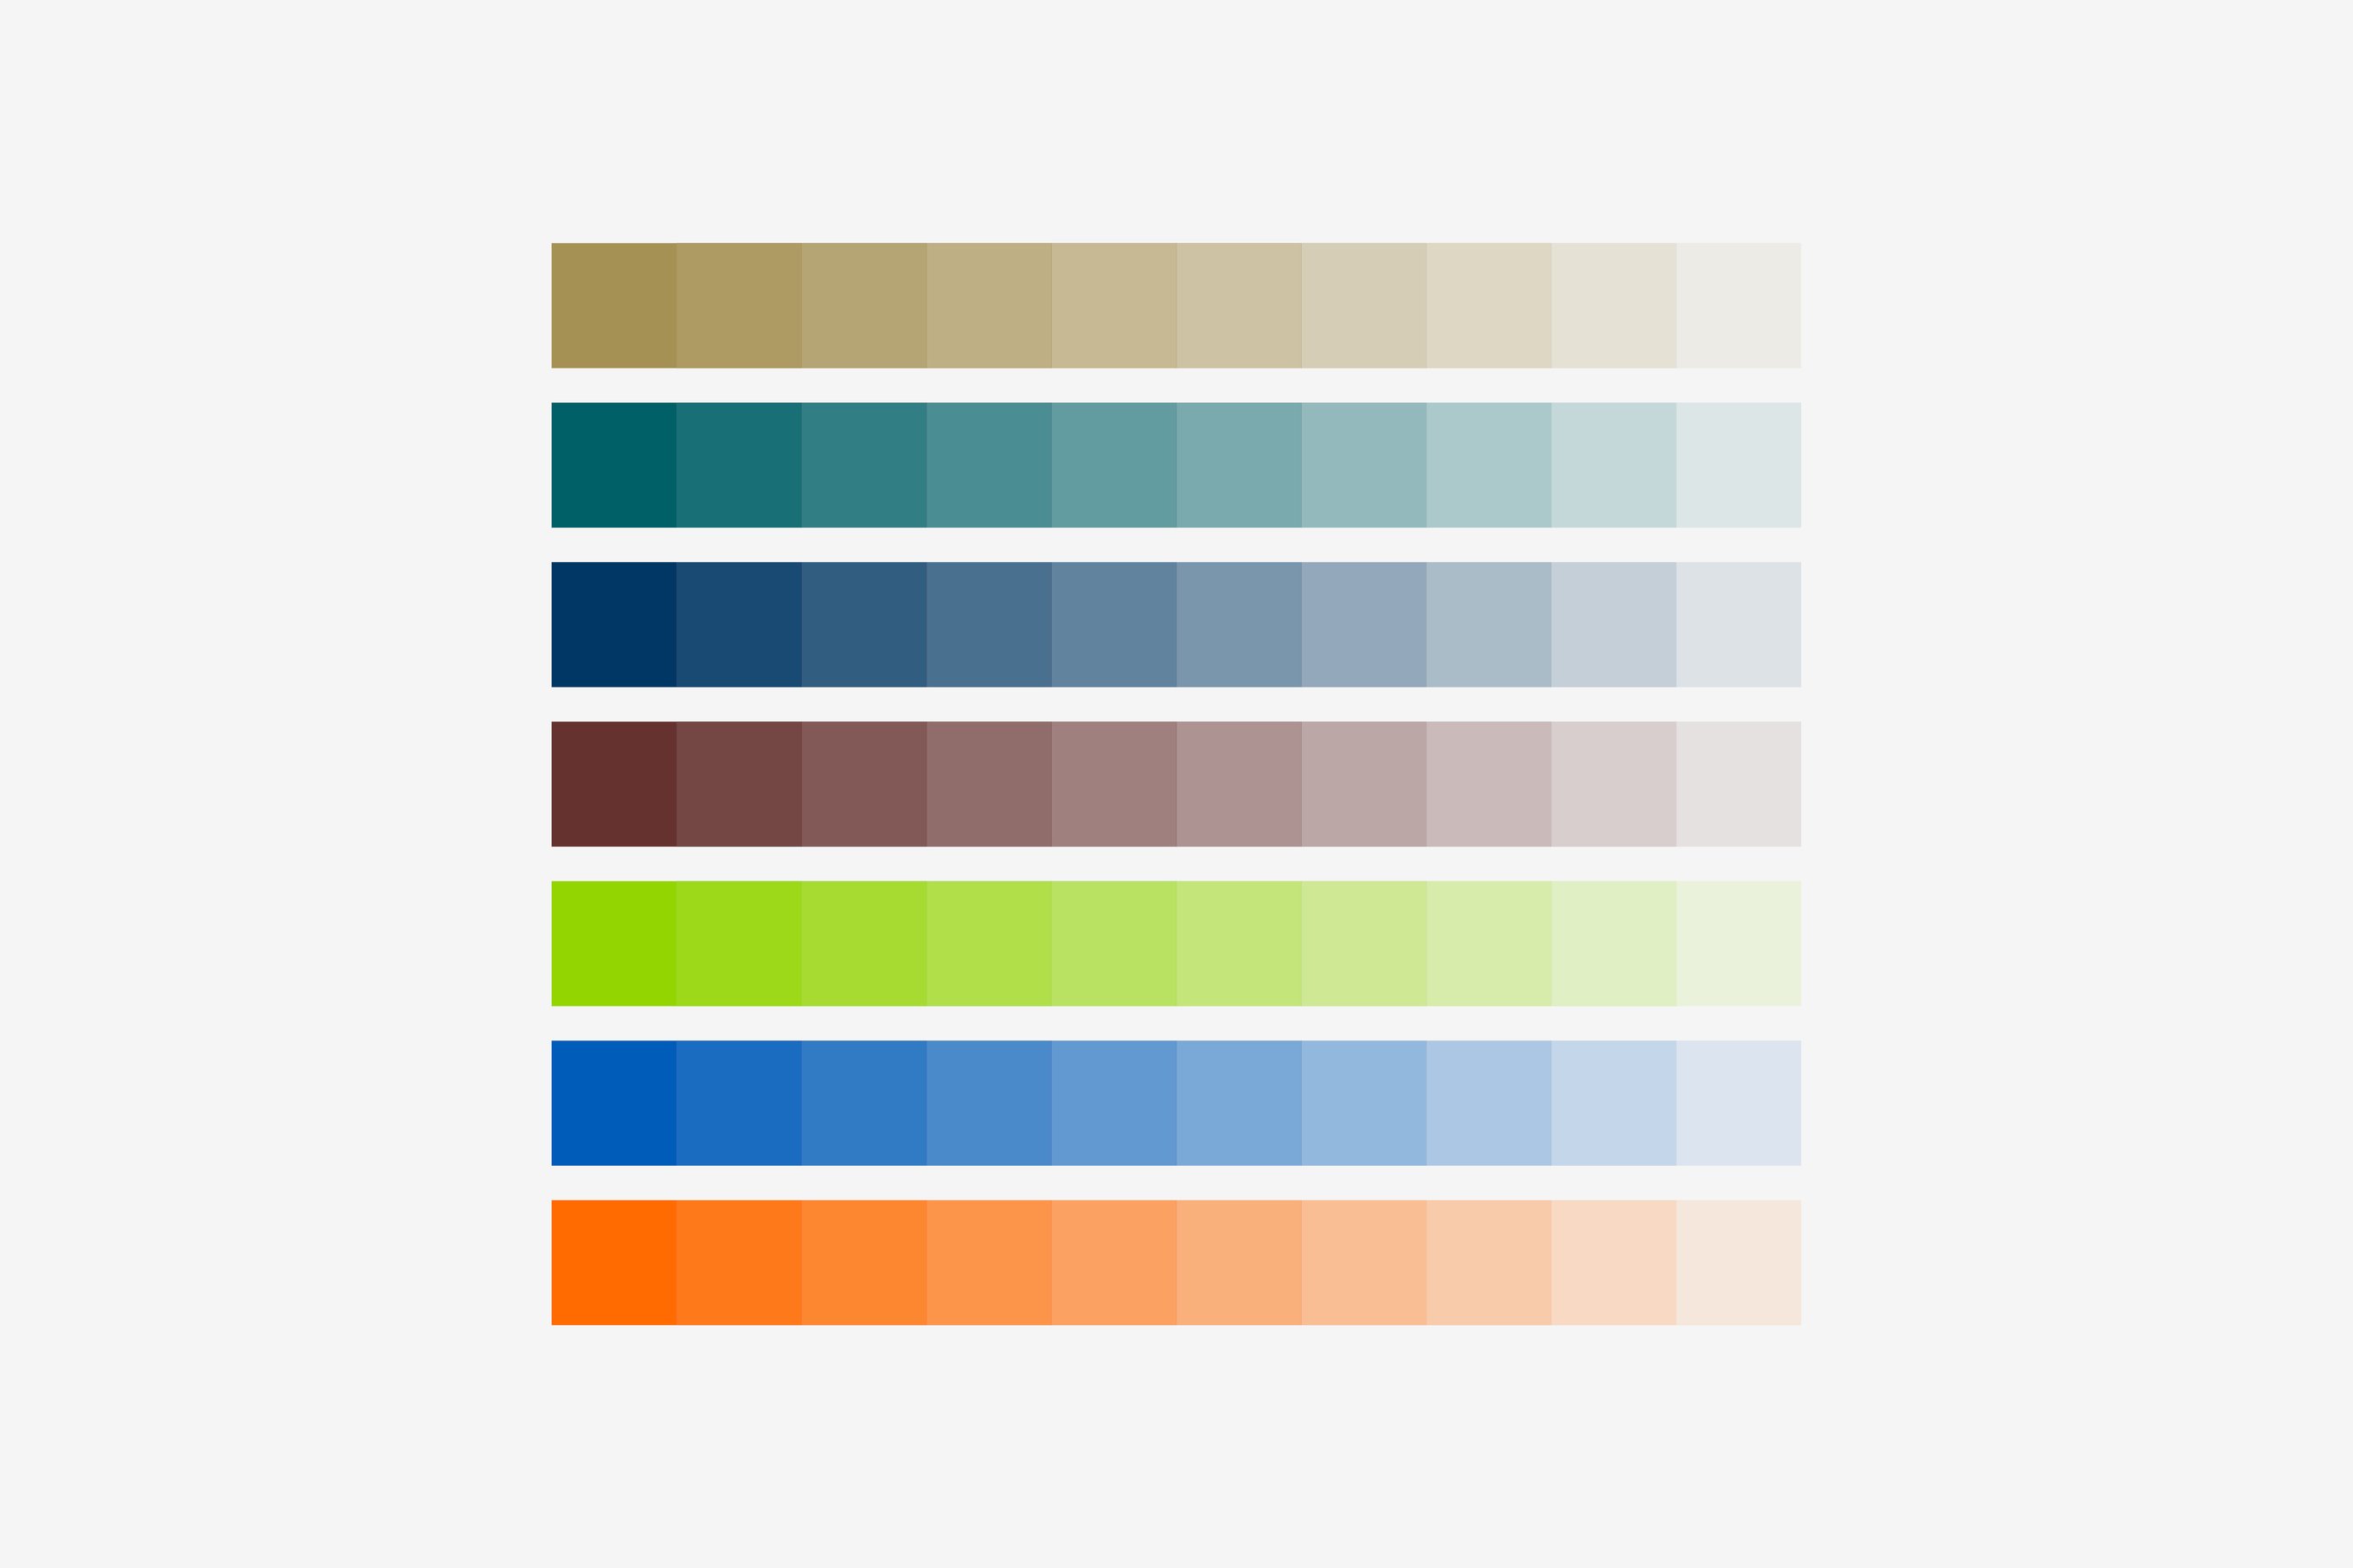 Seven bars of colour and their opacity, from gold, teal, navy, burgundy, lime, blue, and orange in their various hues.